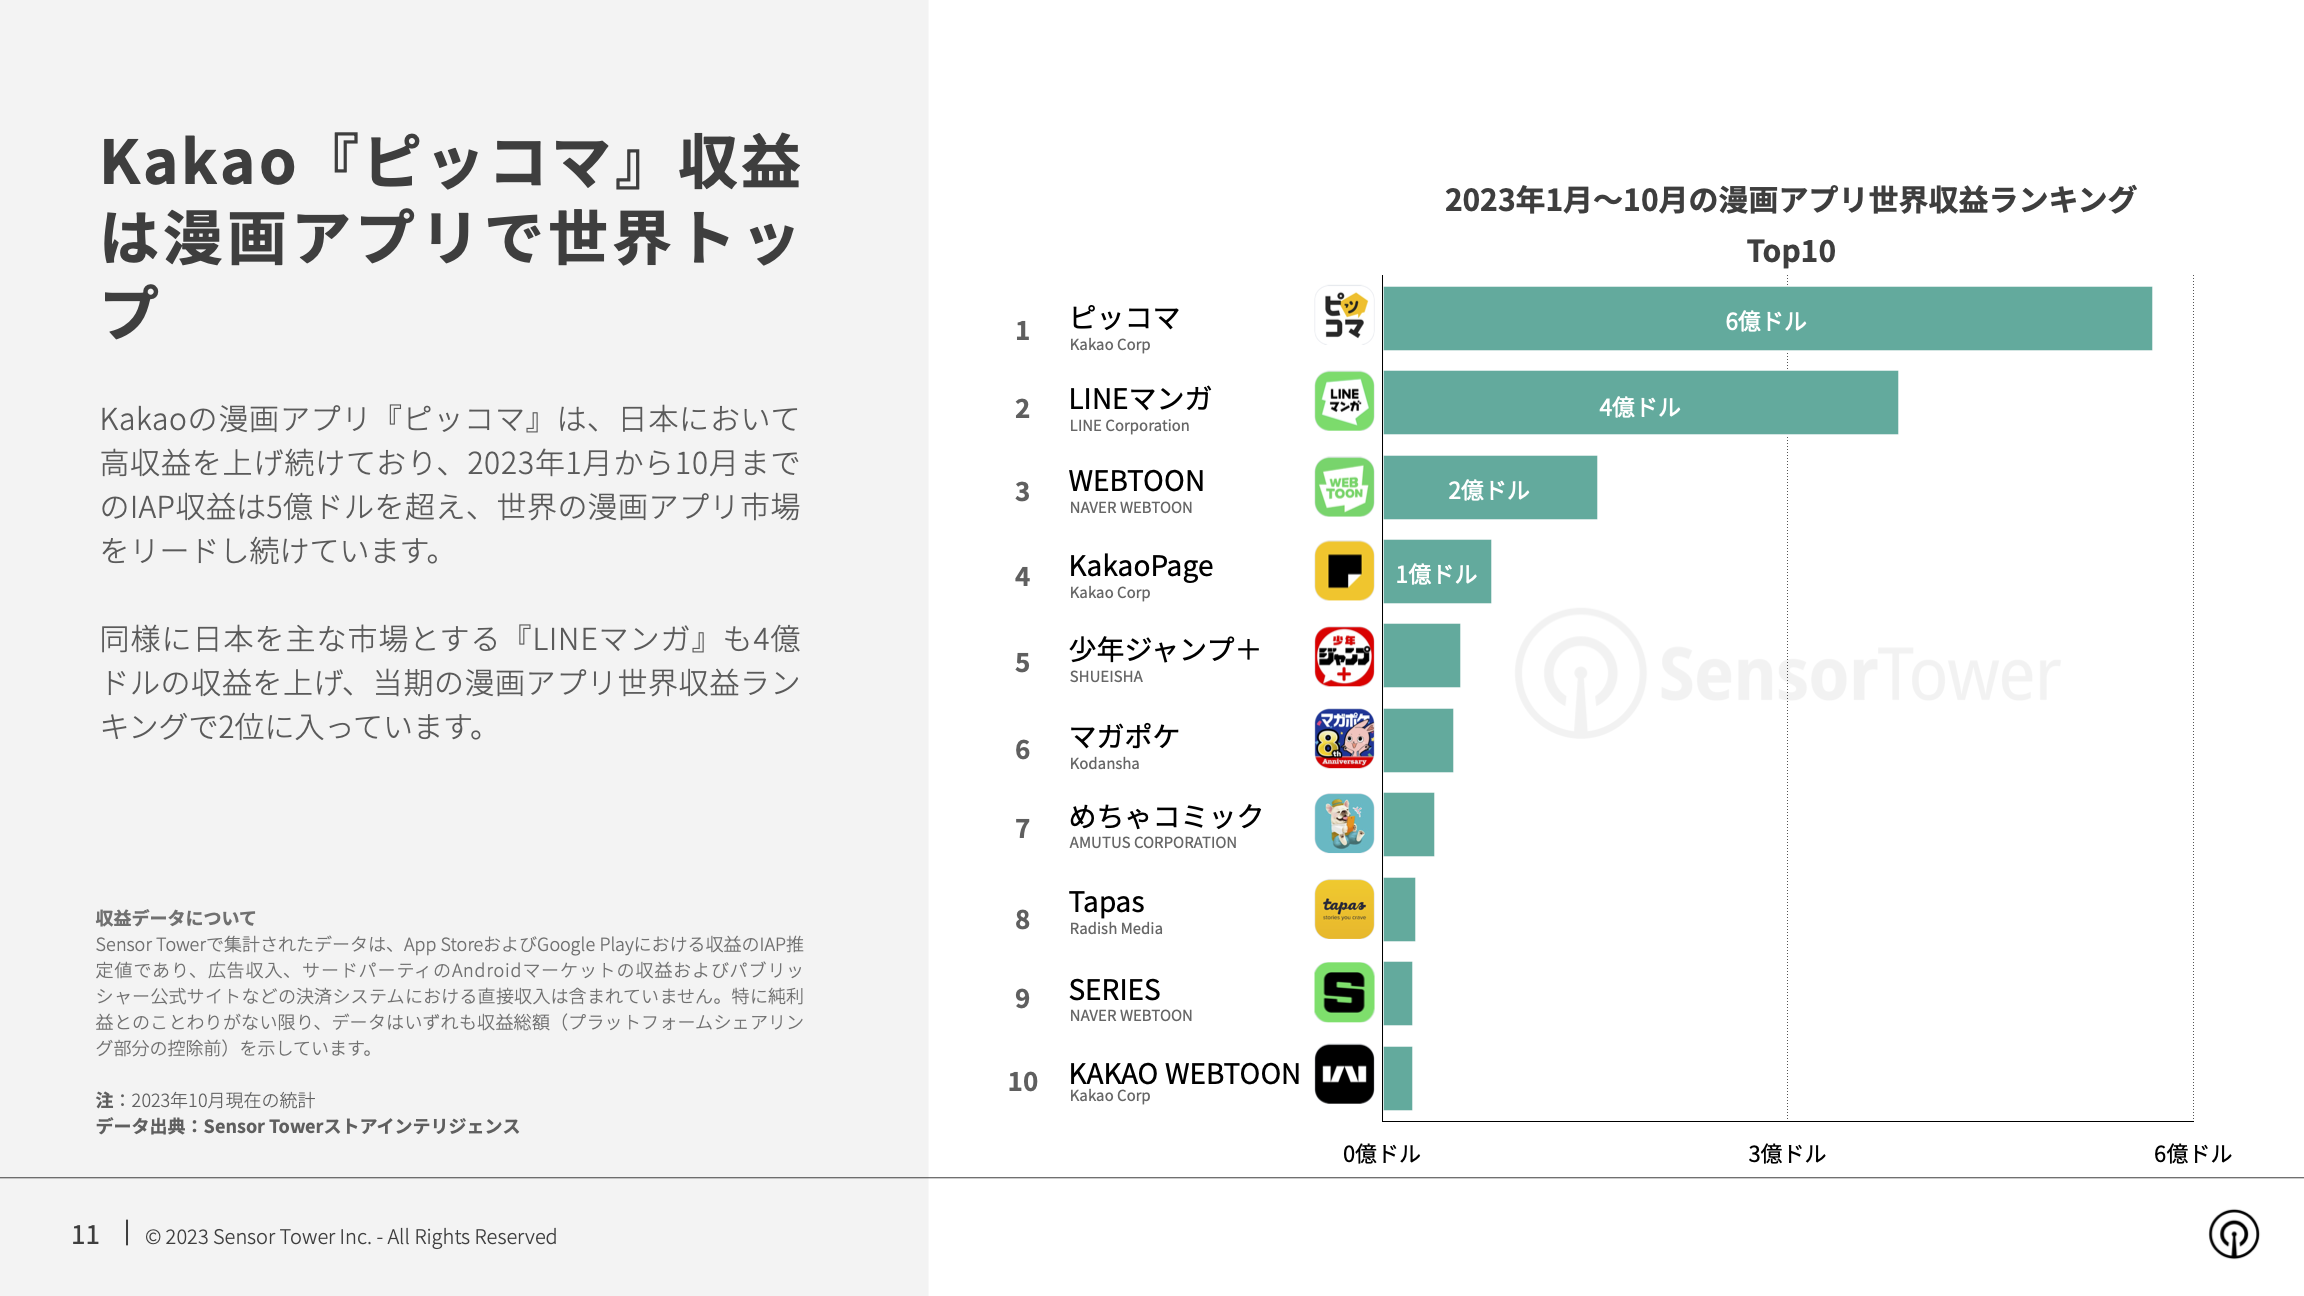 -JP- State of Manga Apps 2023 Report(pg11)